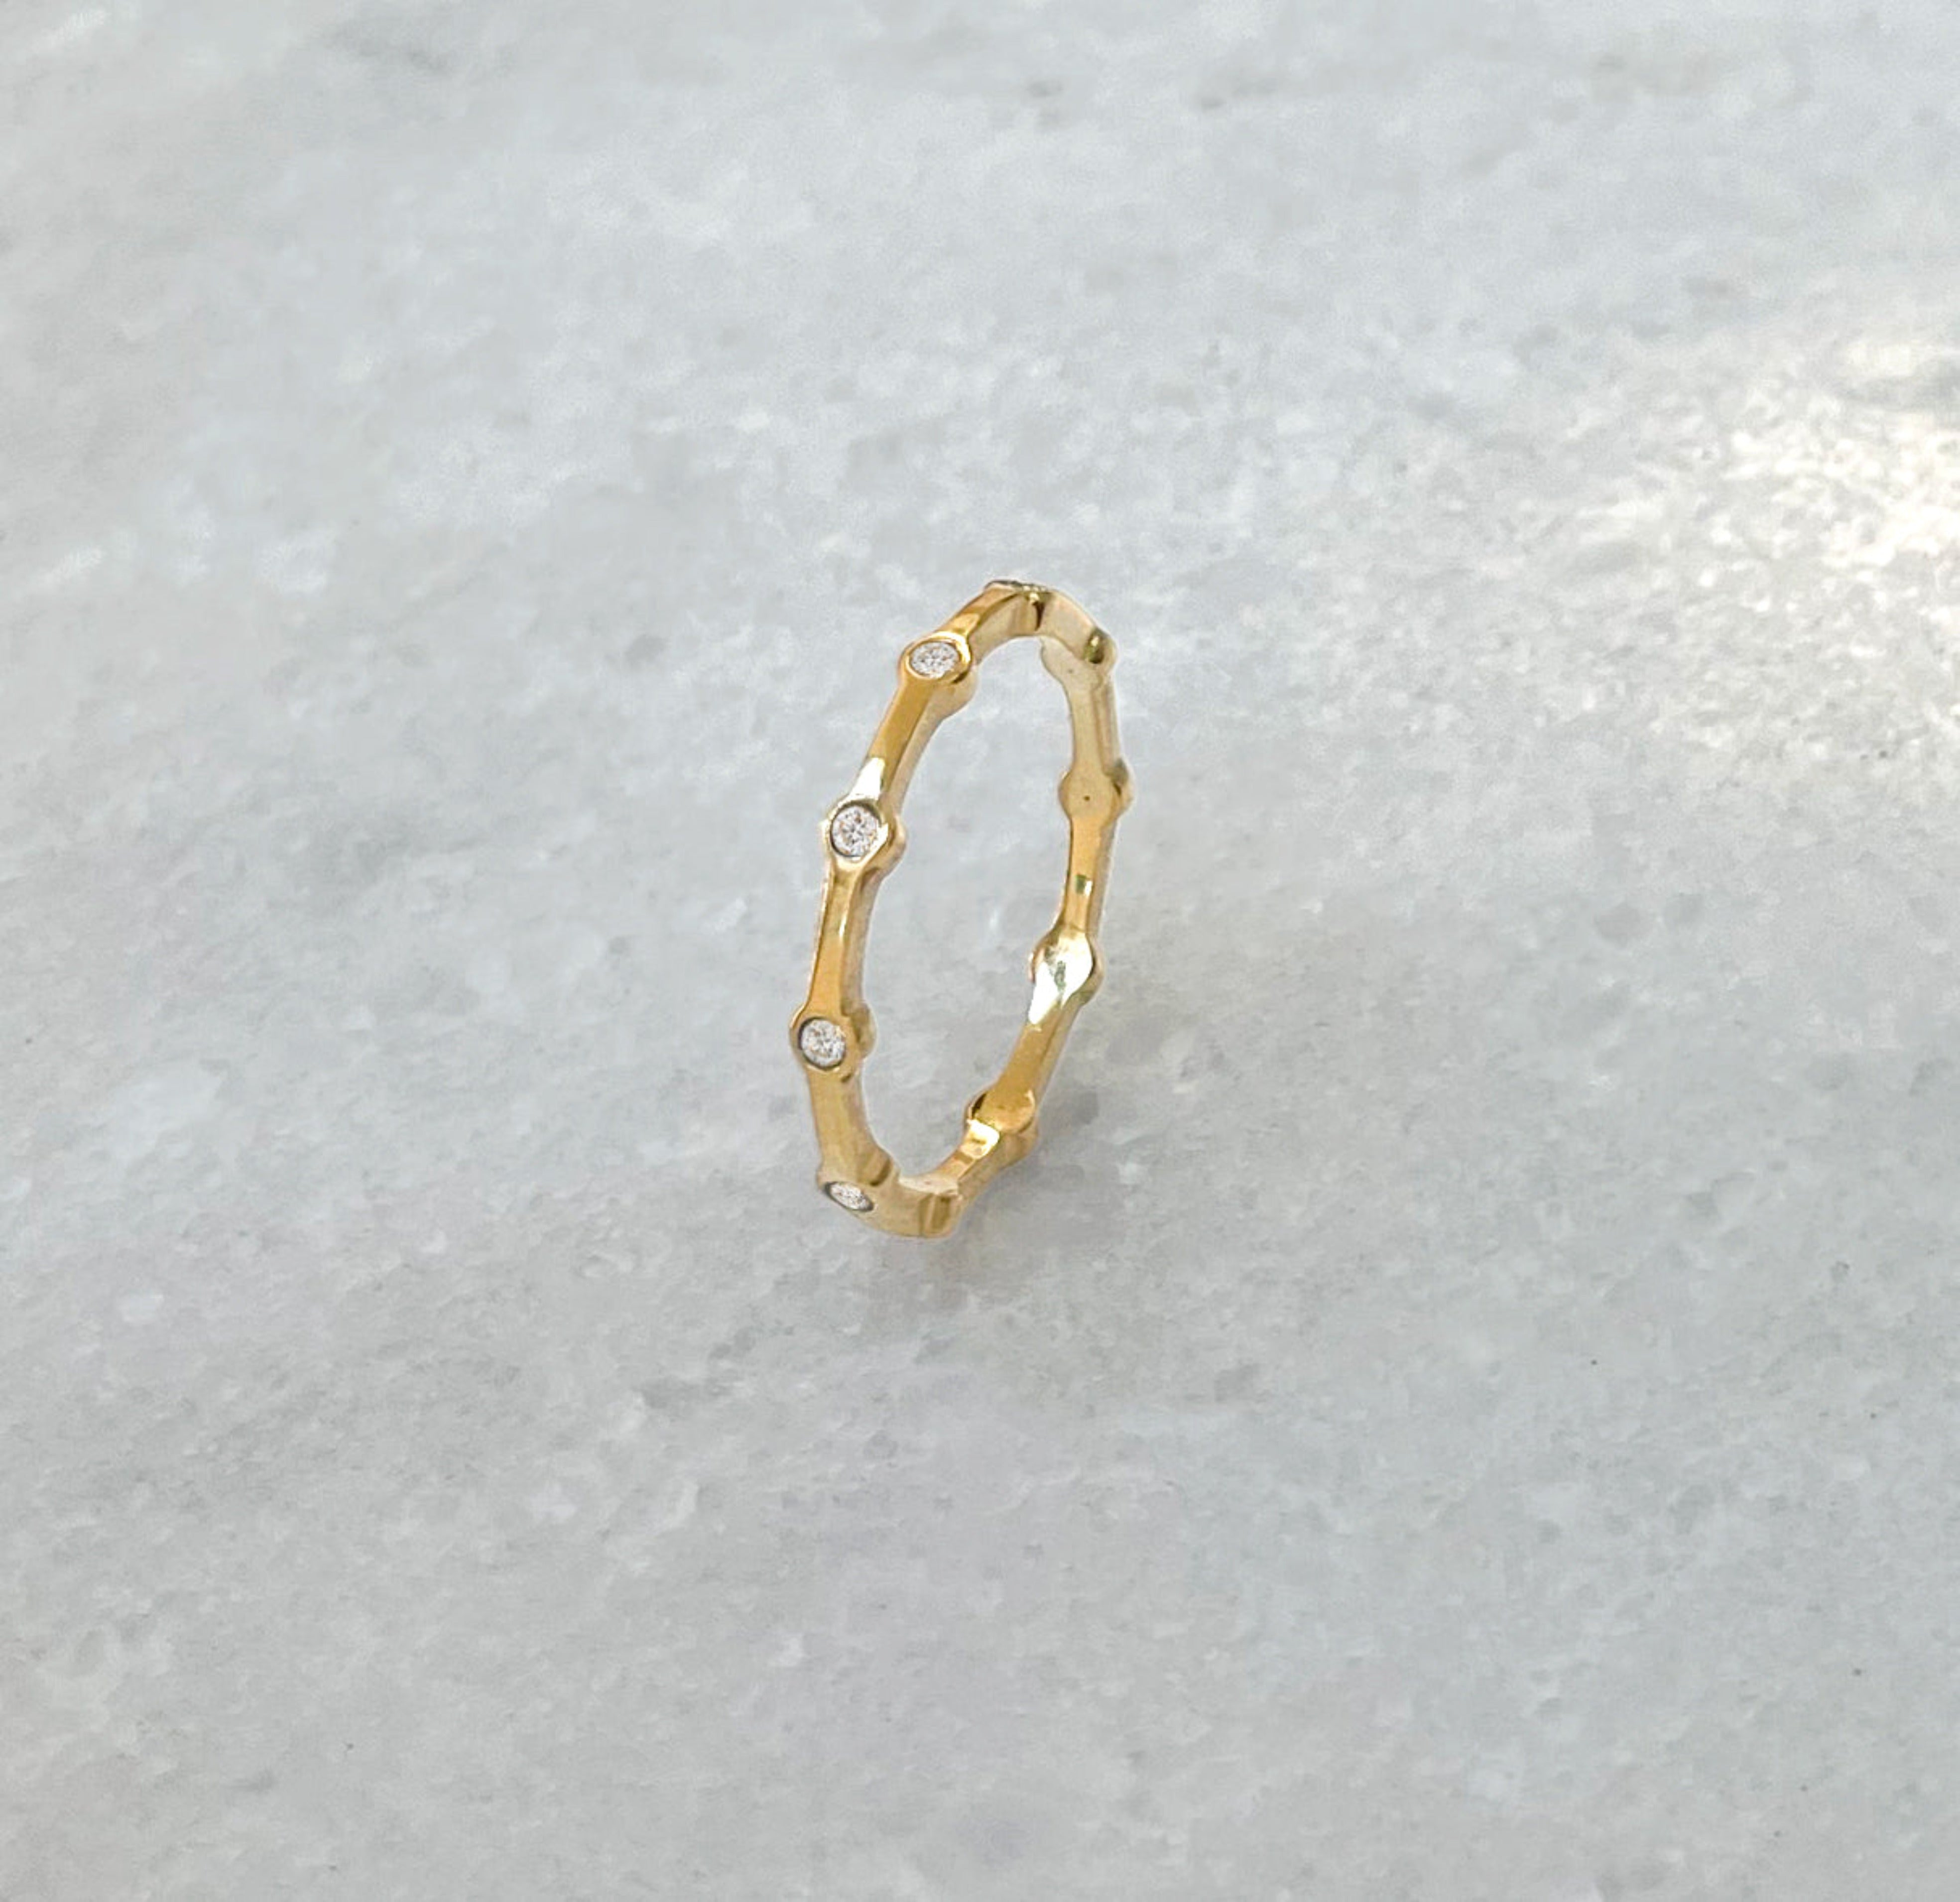 Daphne thin dainty gold pave ring, waterproof jewelry